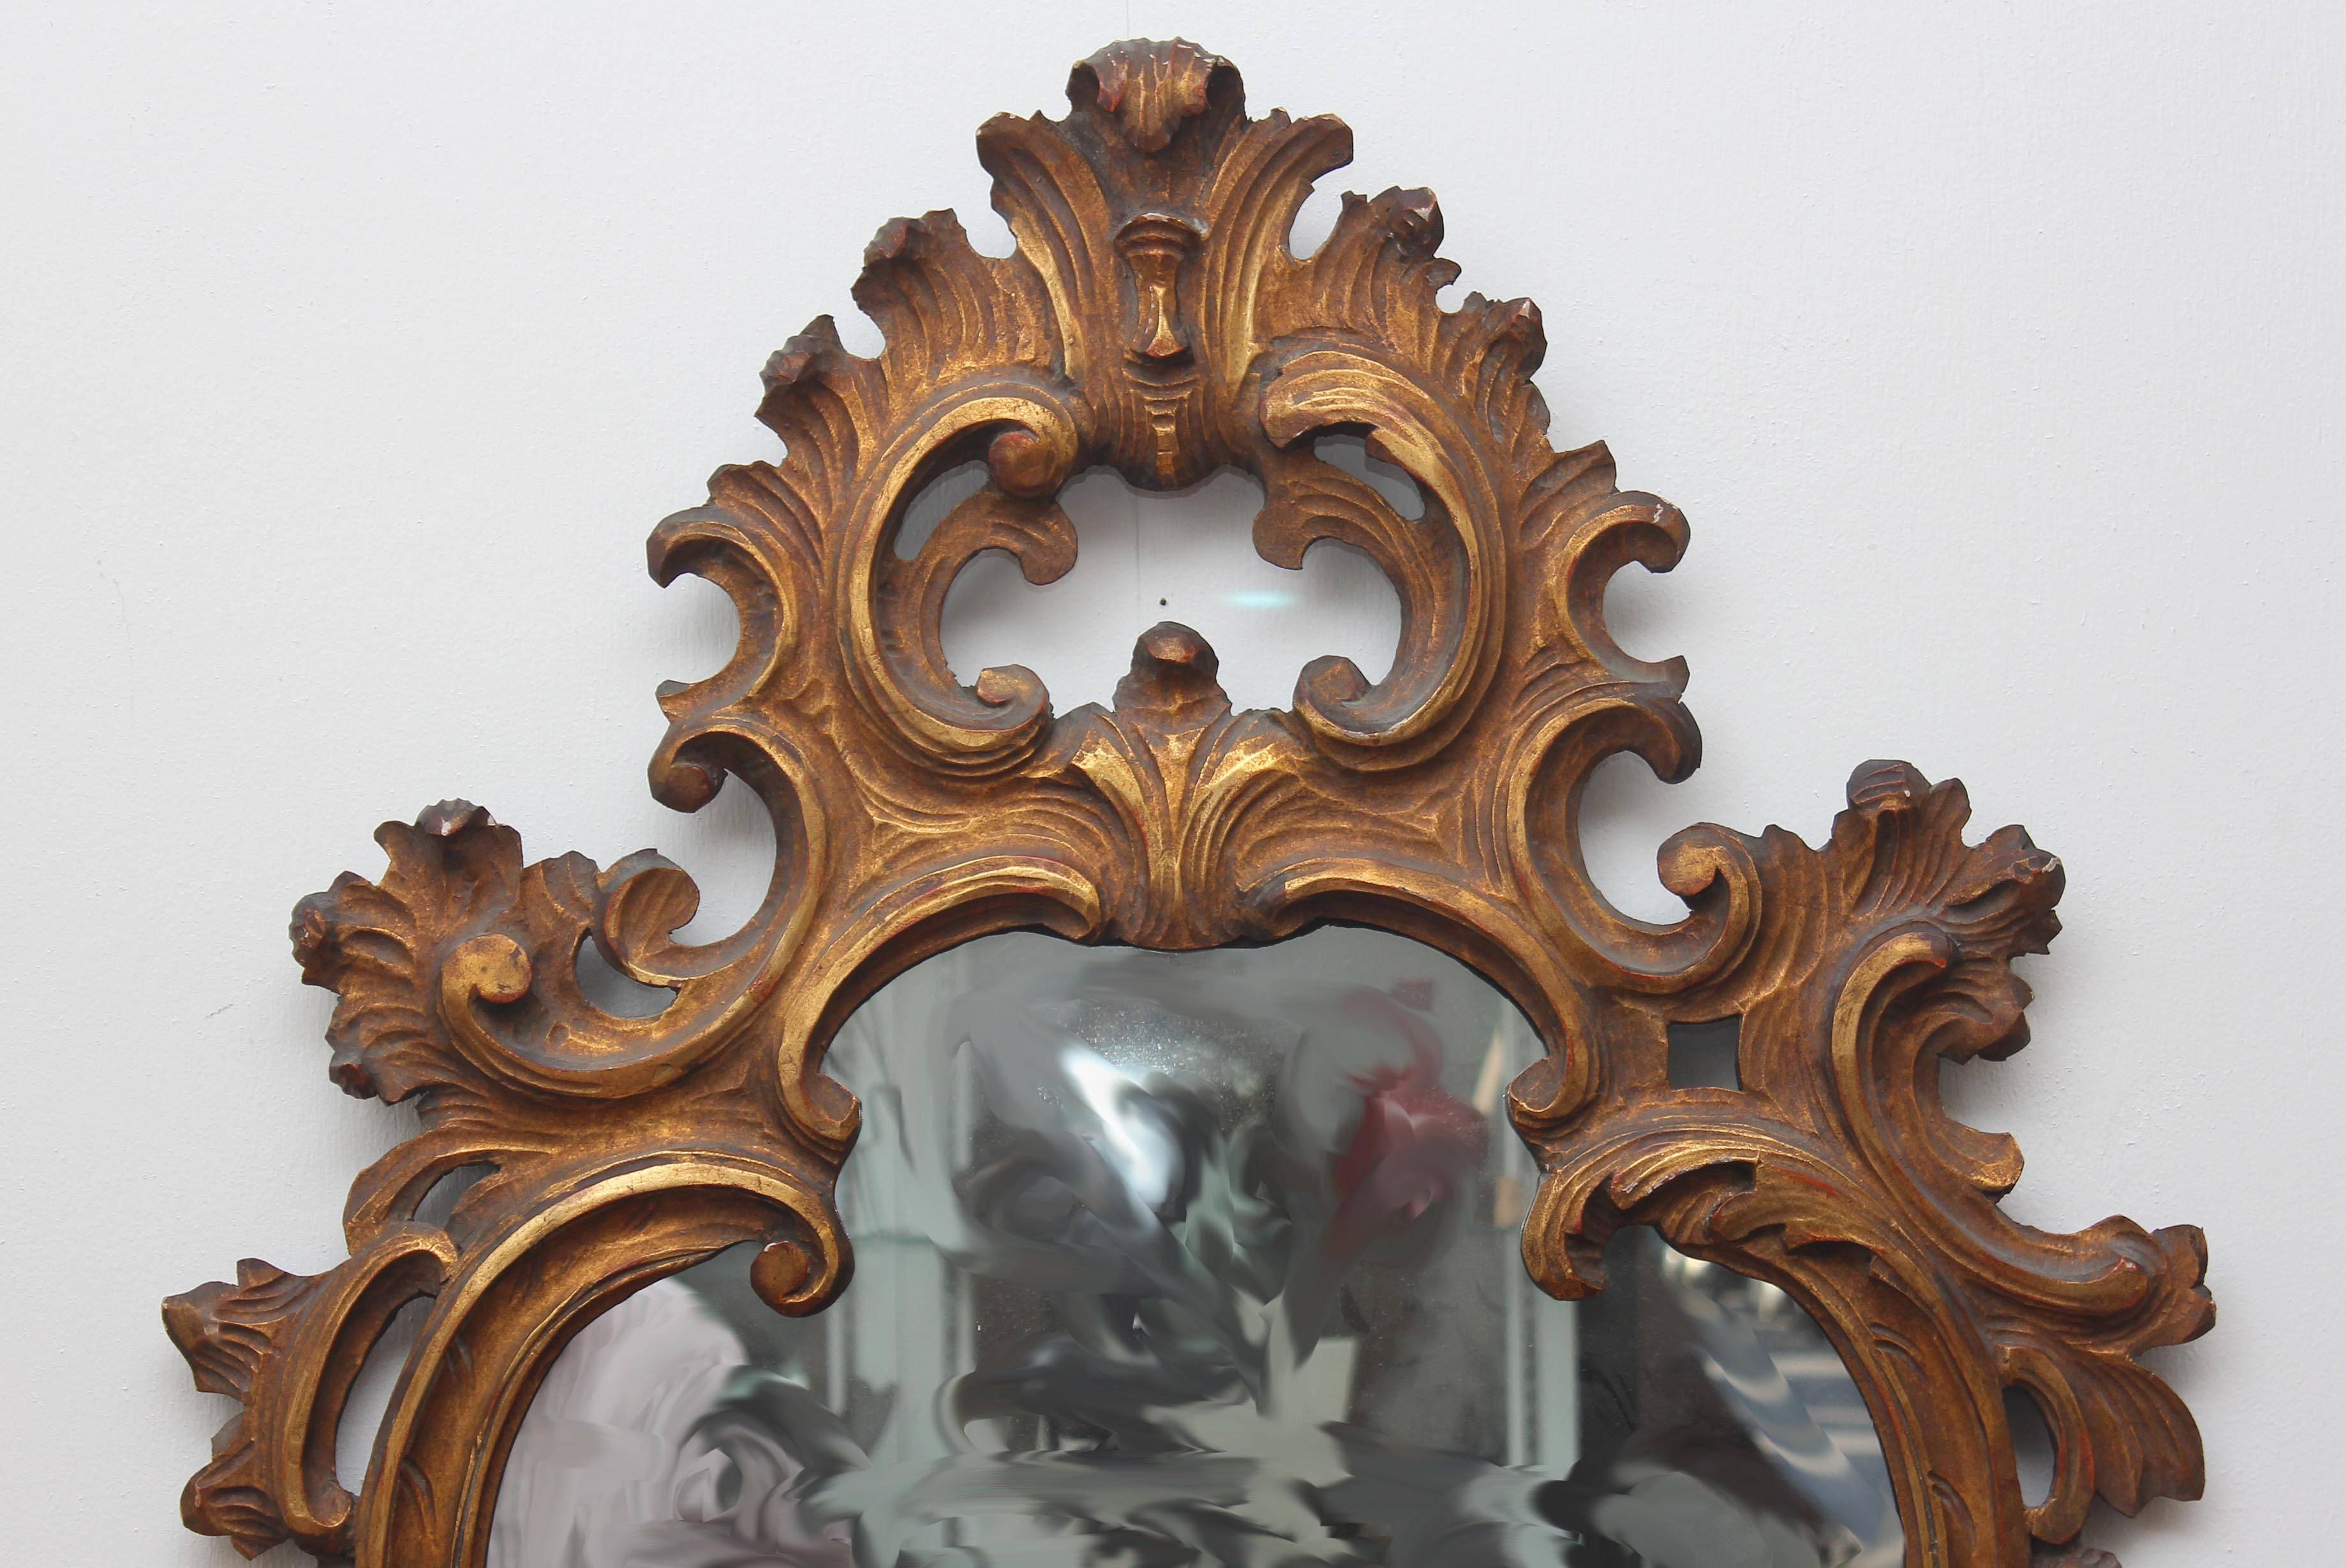 Large Venetian Rococo style carved giltwood mirror. Excellent quality.